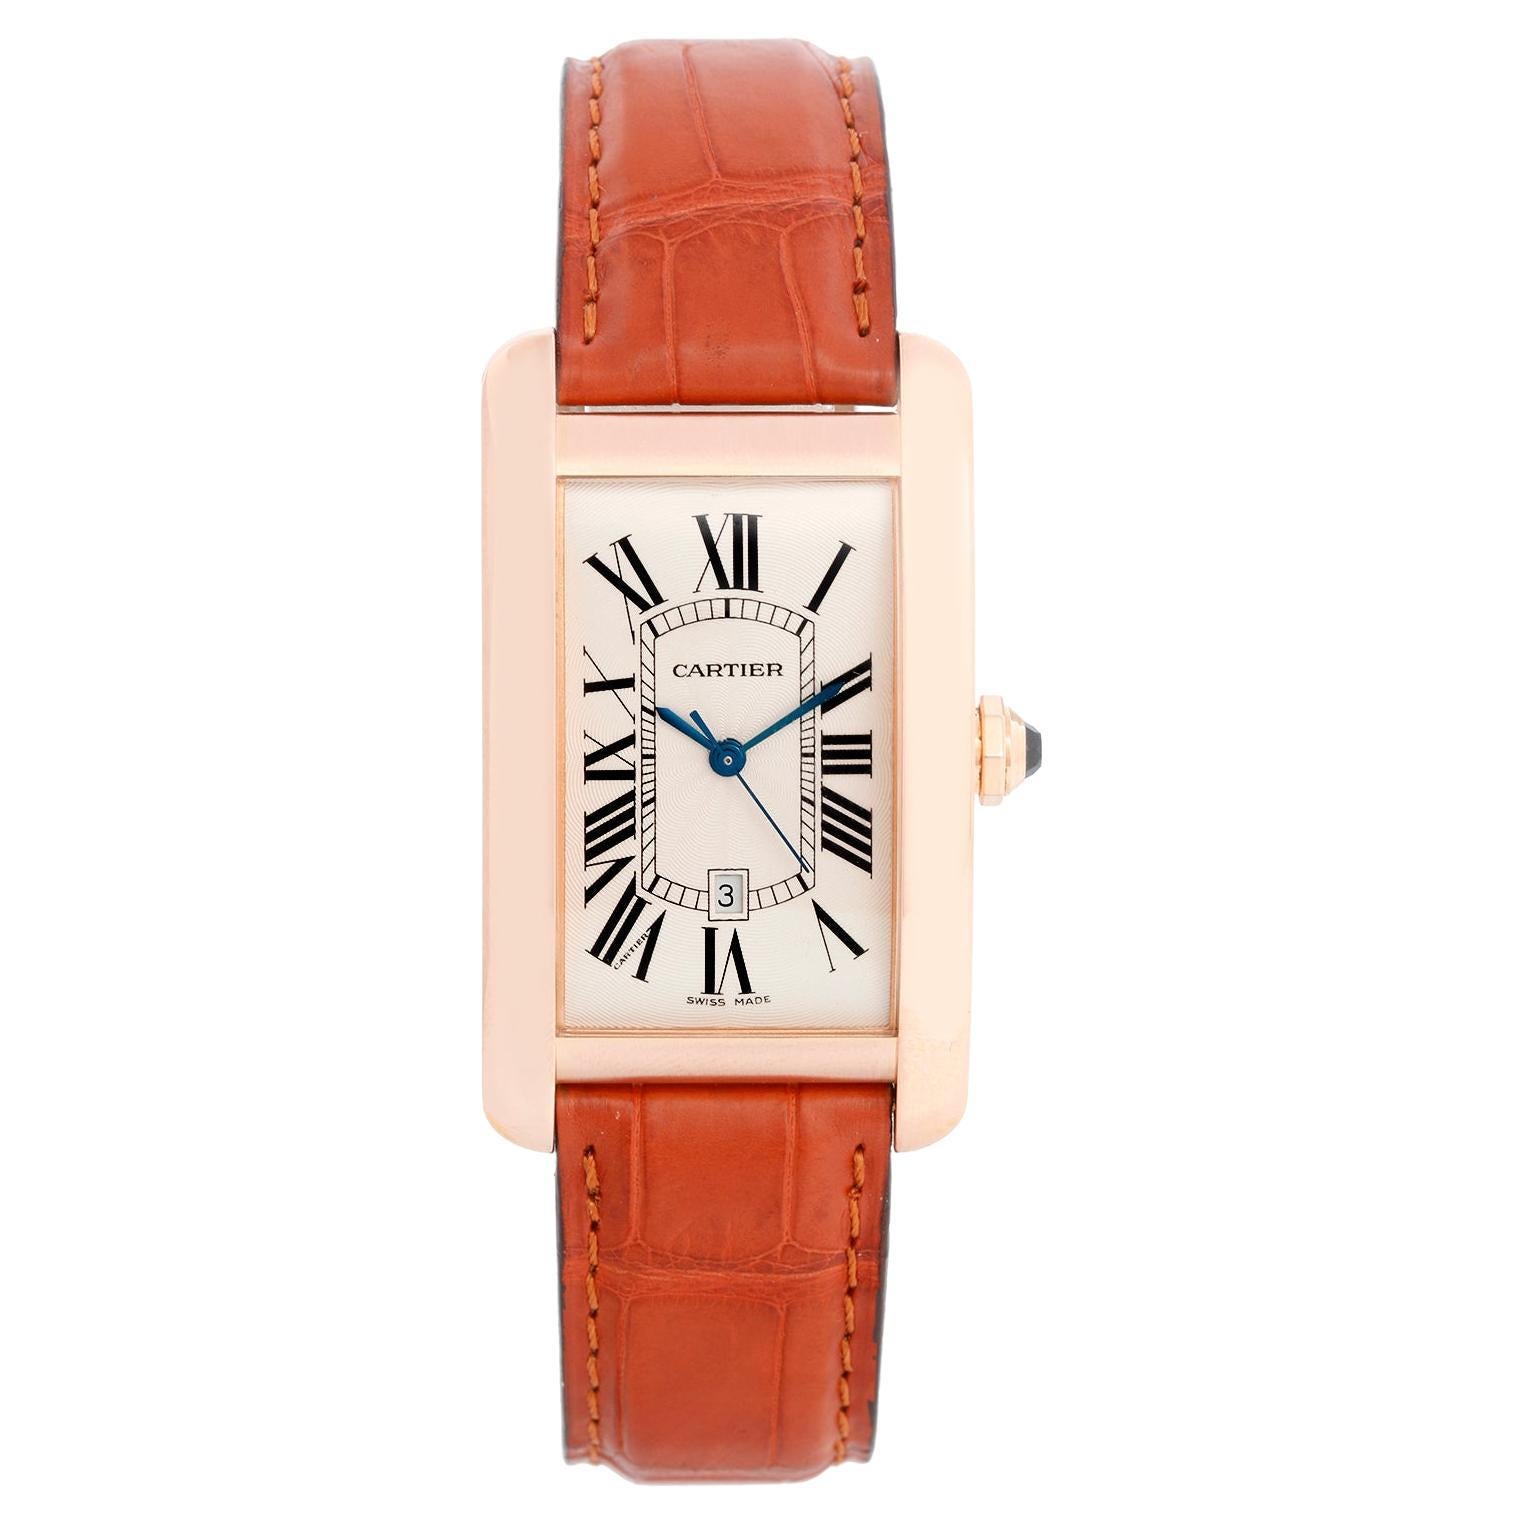 Cartier Tank Americaine 18k Rose Gold Automatic Watch W2609156